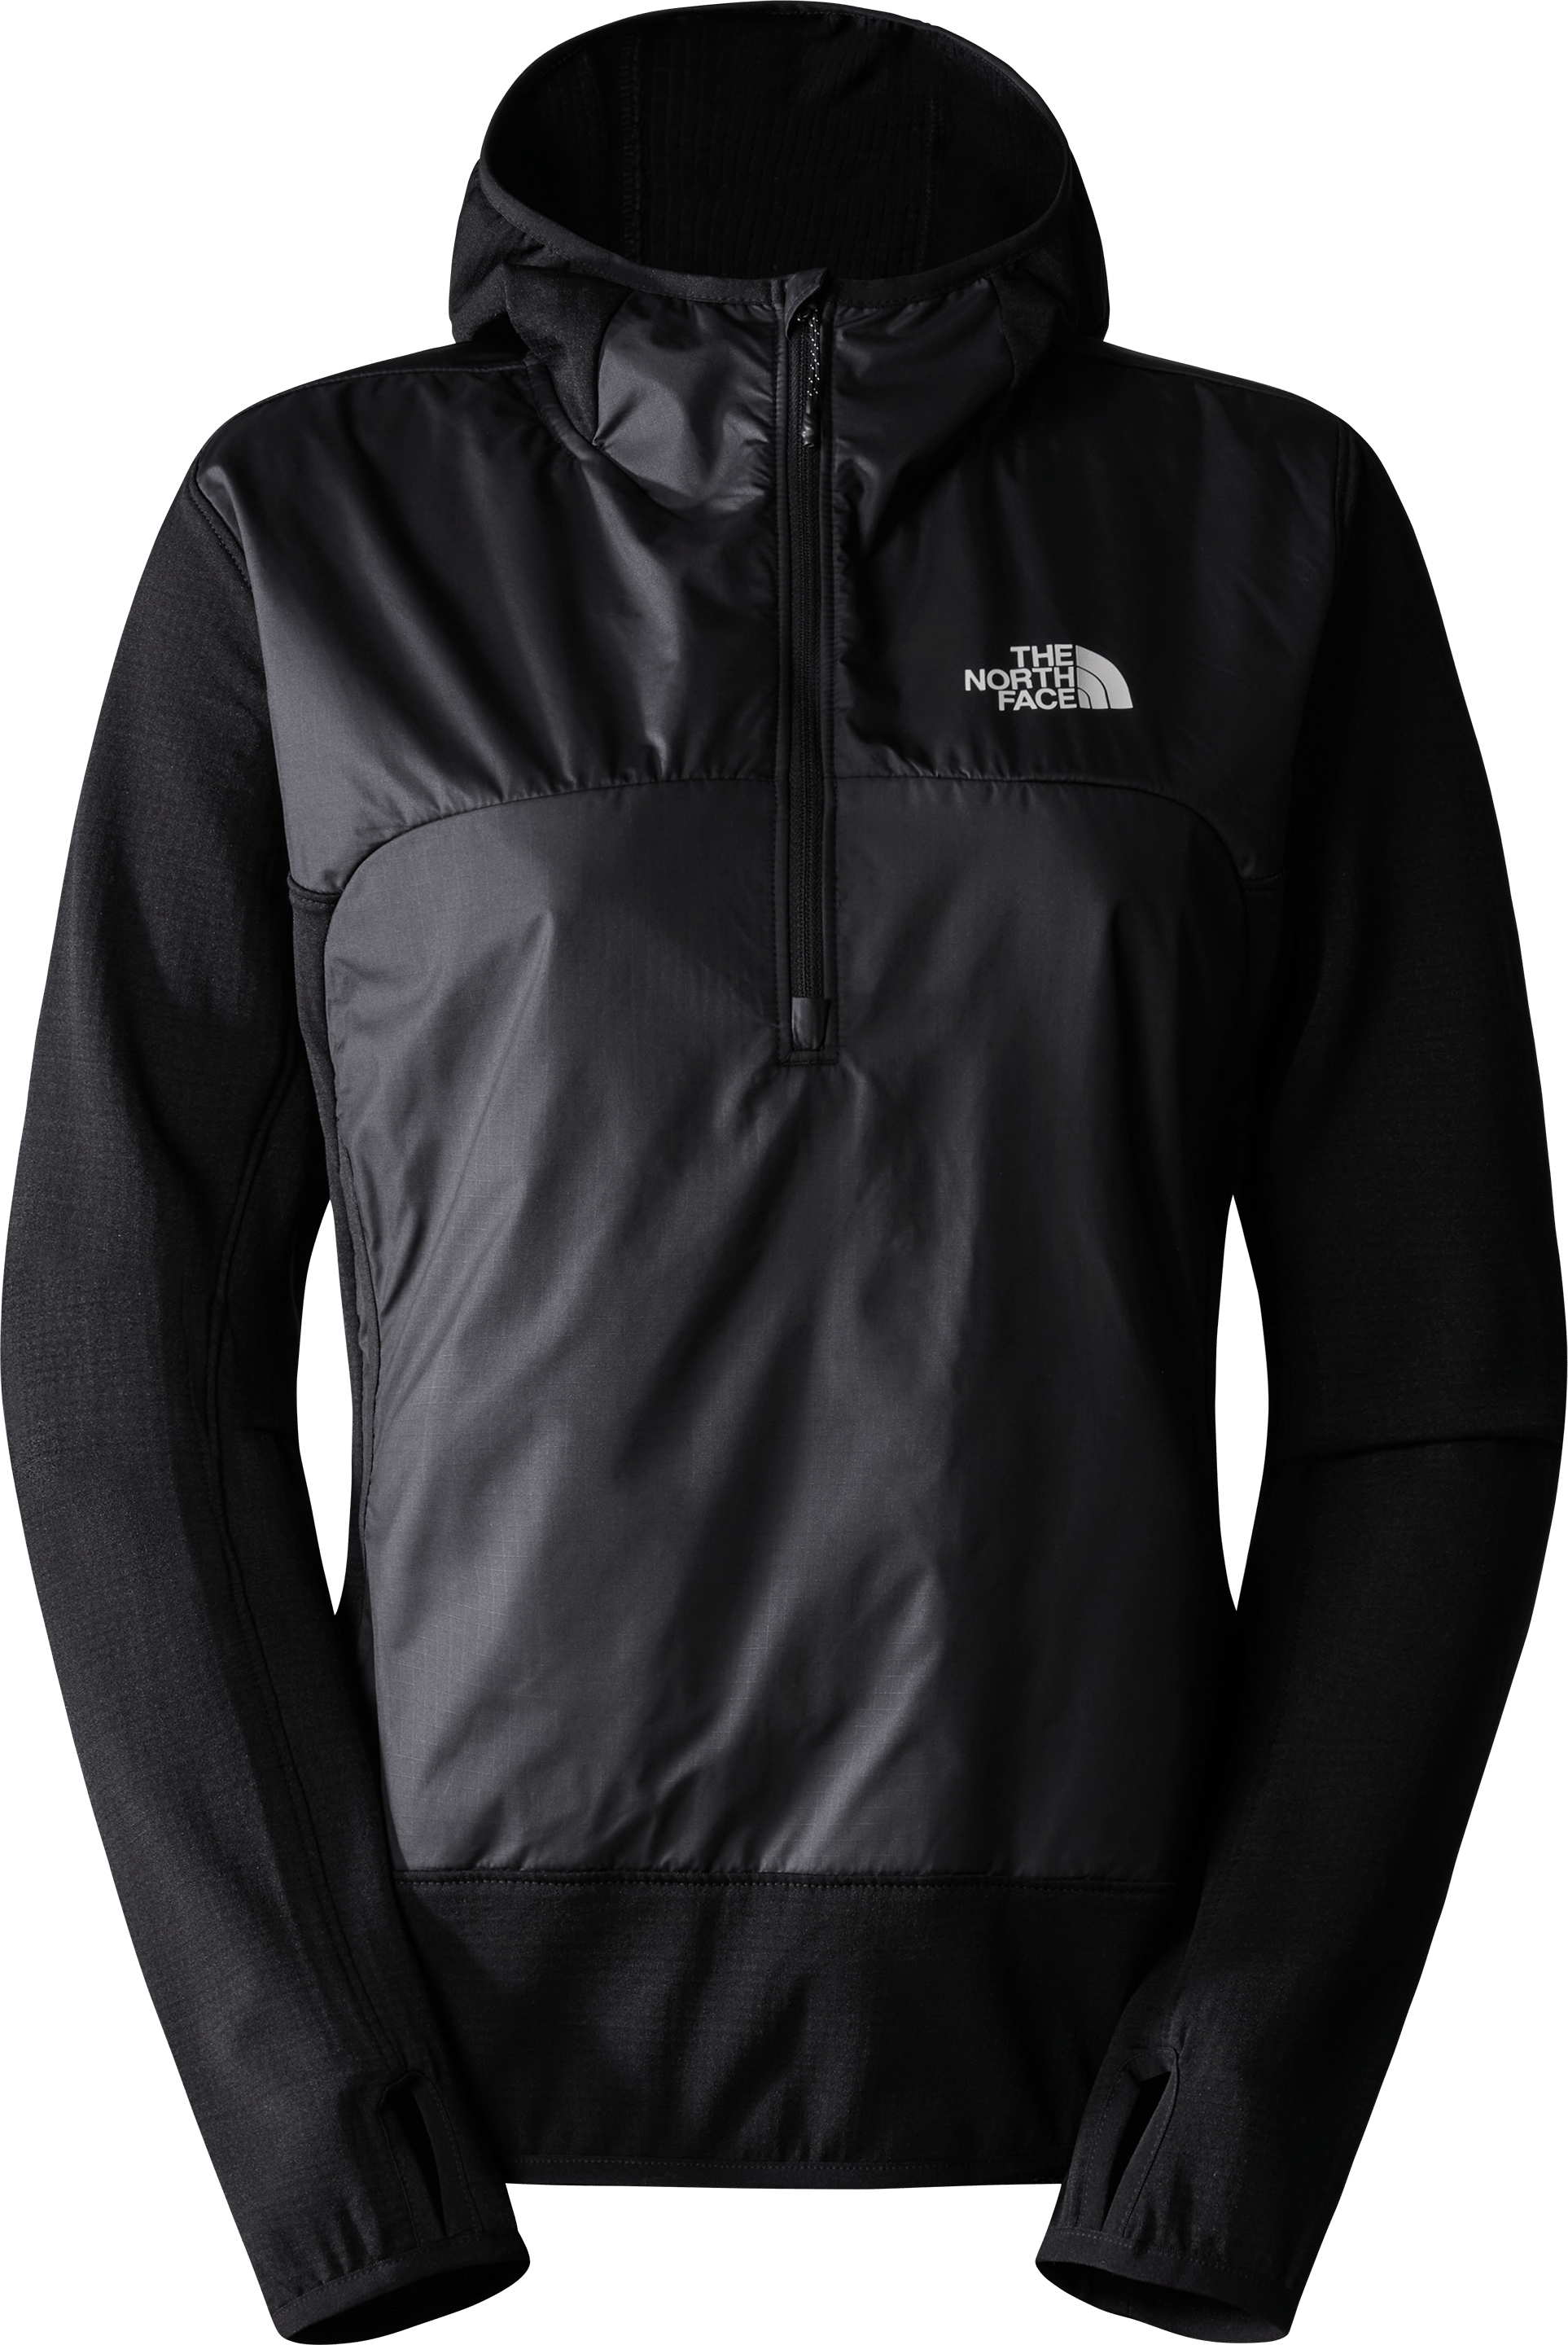 Buy The North Face Women's Winter Warm Jacket, TNF Black, S at